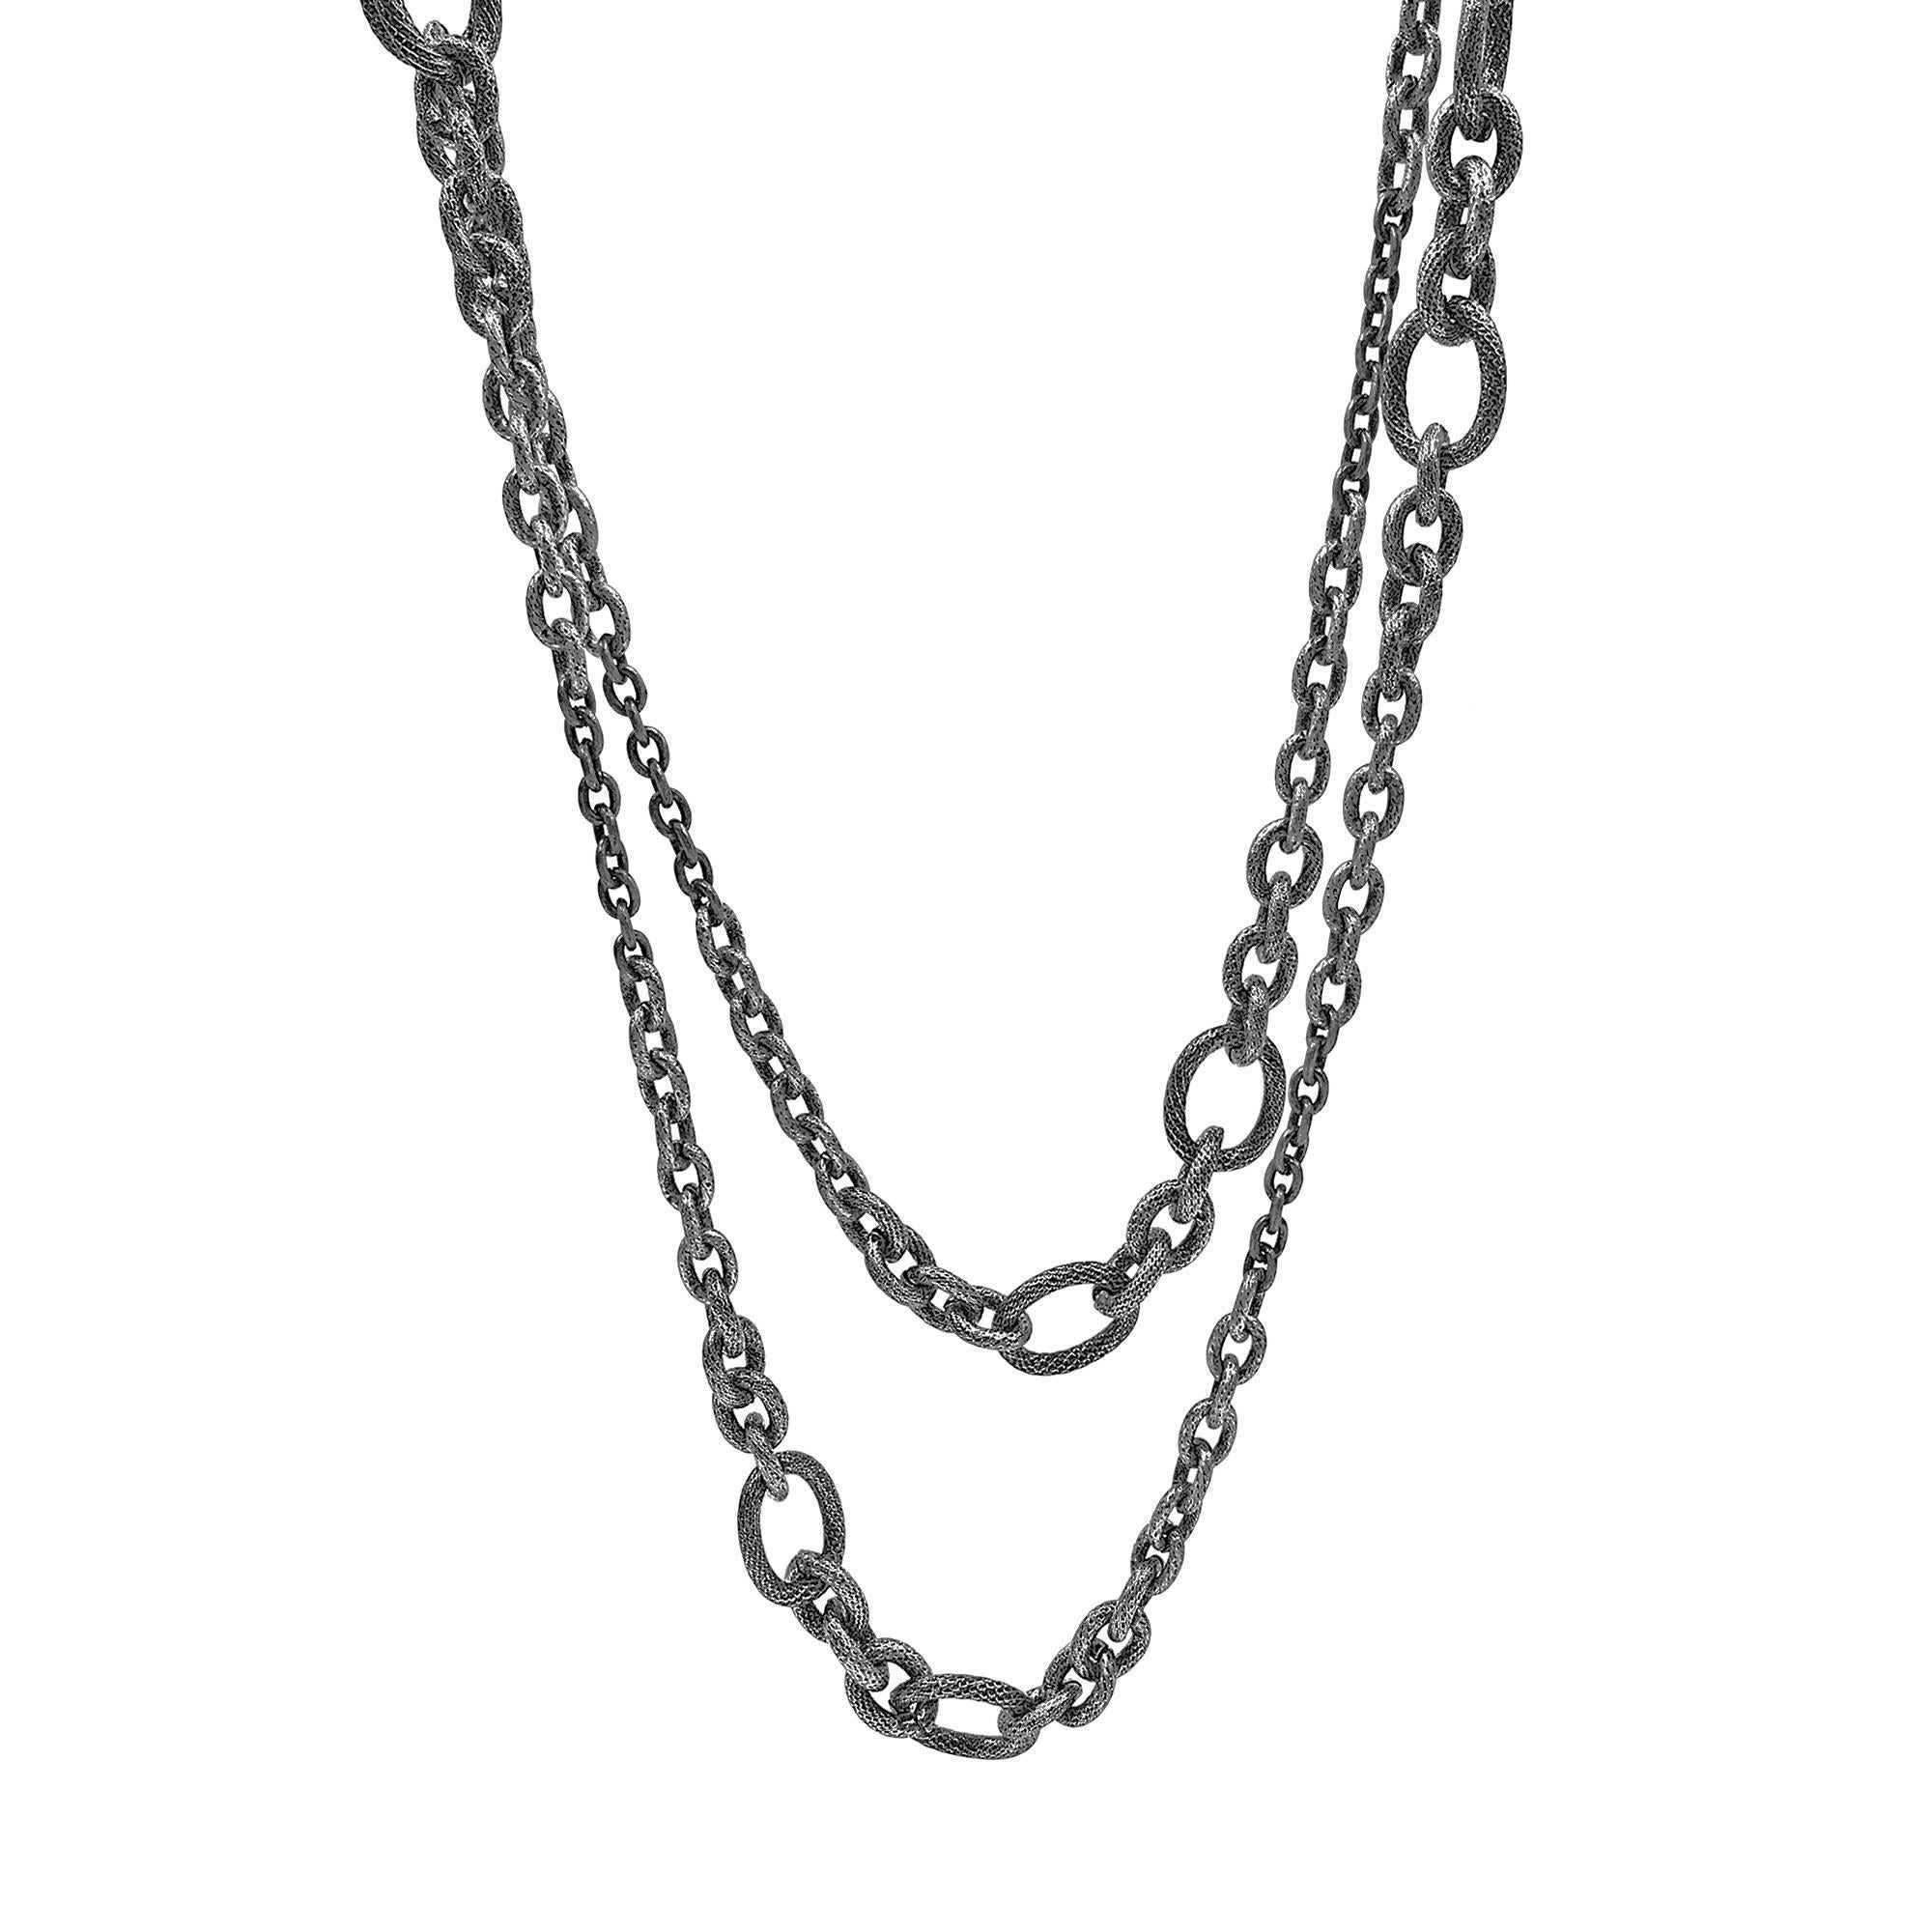 Liza Beth Signature Long Graduating Stainless Steel Chain Link Necklace